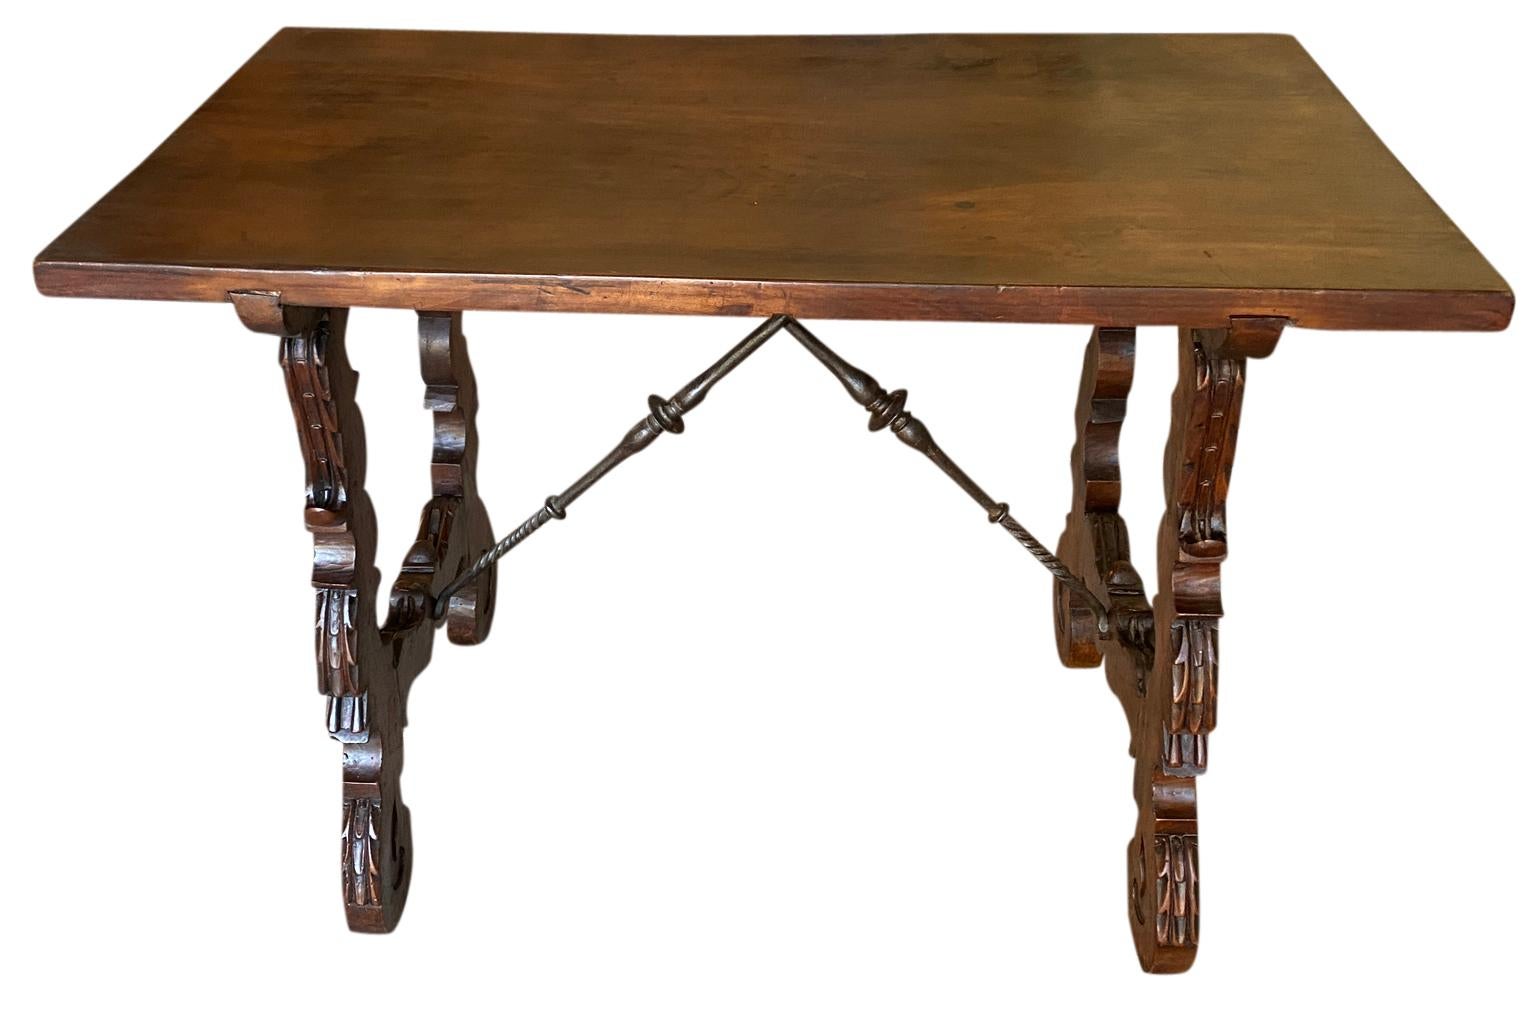 A very lovely 19th century Spanish Writing Table - Side Table soundly constructed from walnut and hand forged iron stretchers. Handsome carvings on the classical lyre shaped legs. The table has a wonderful solid board top. Wonderful patina.